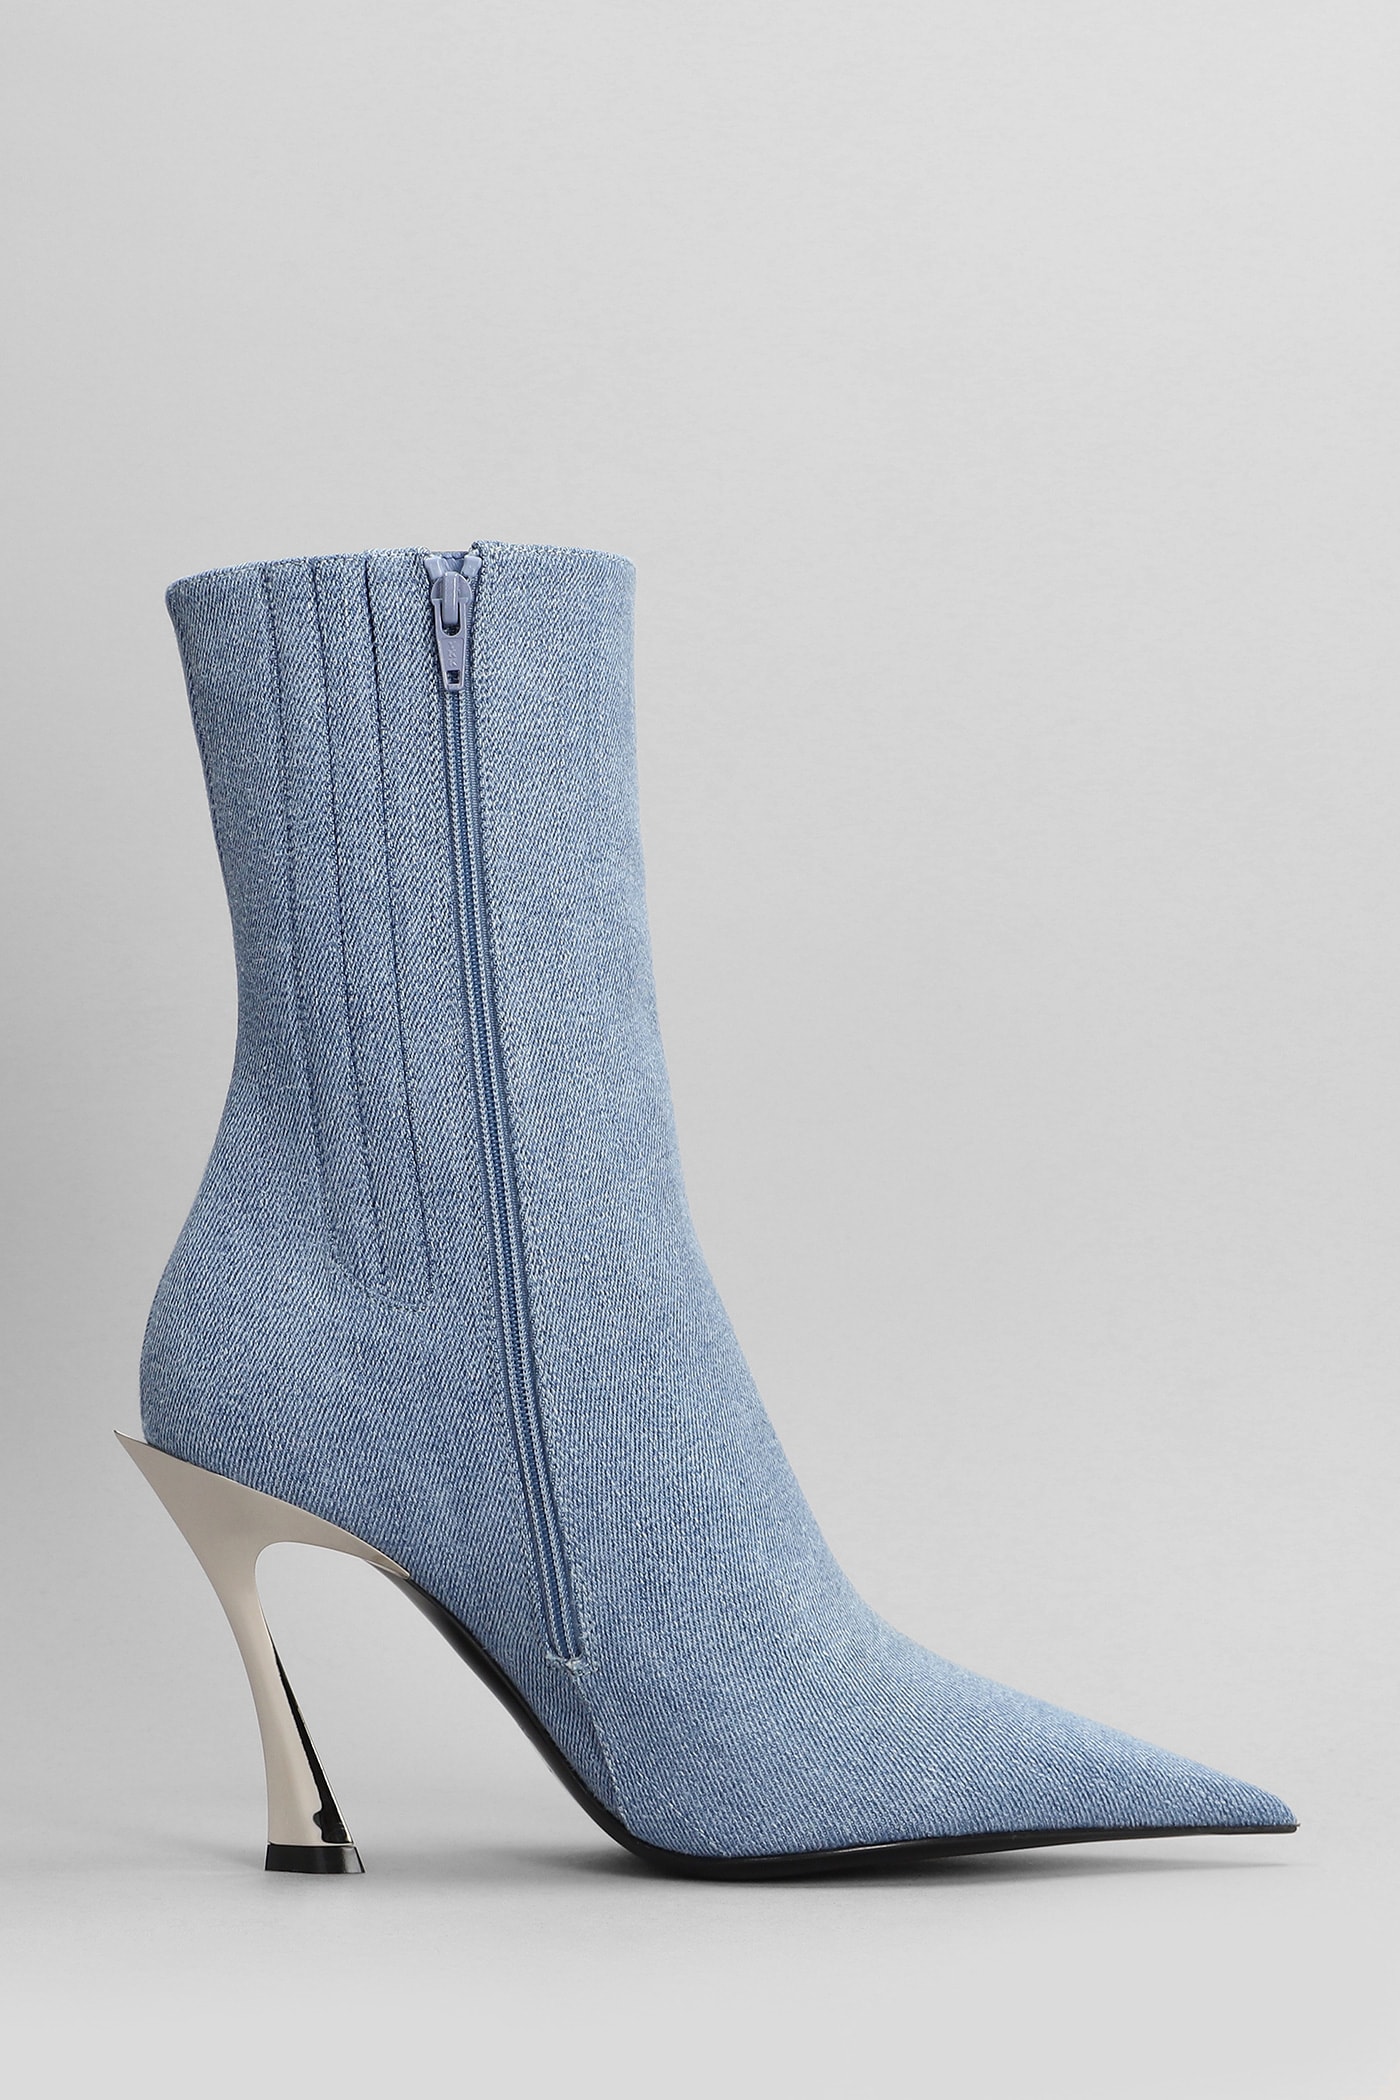 Mugler High Heels Ankle Boots In Blue Cotton